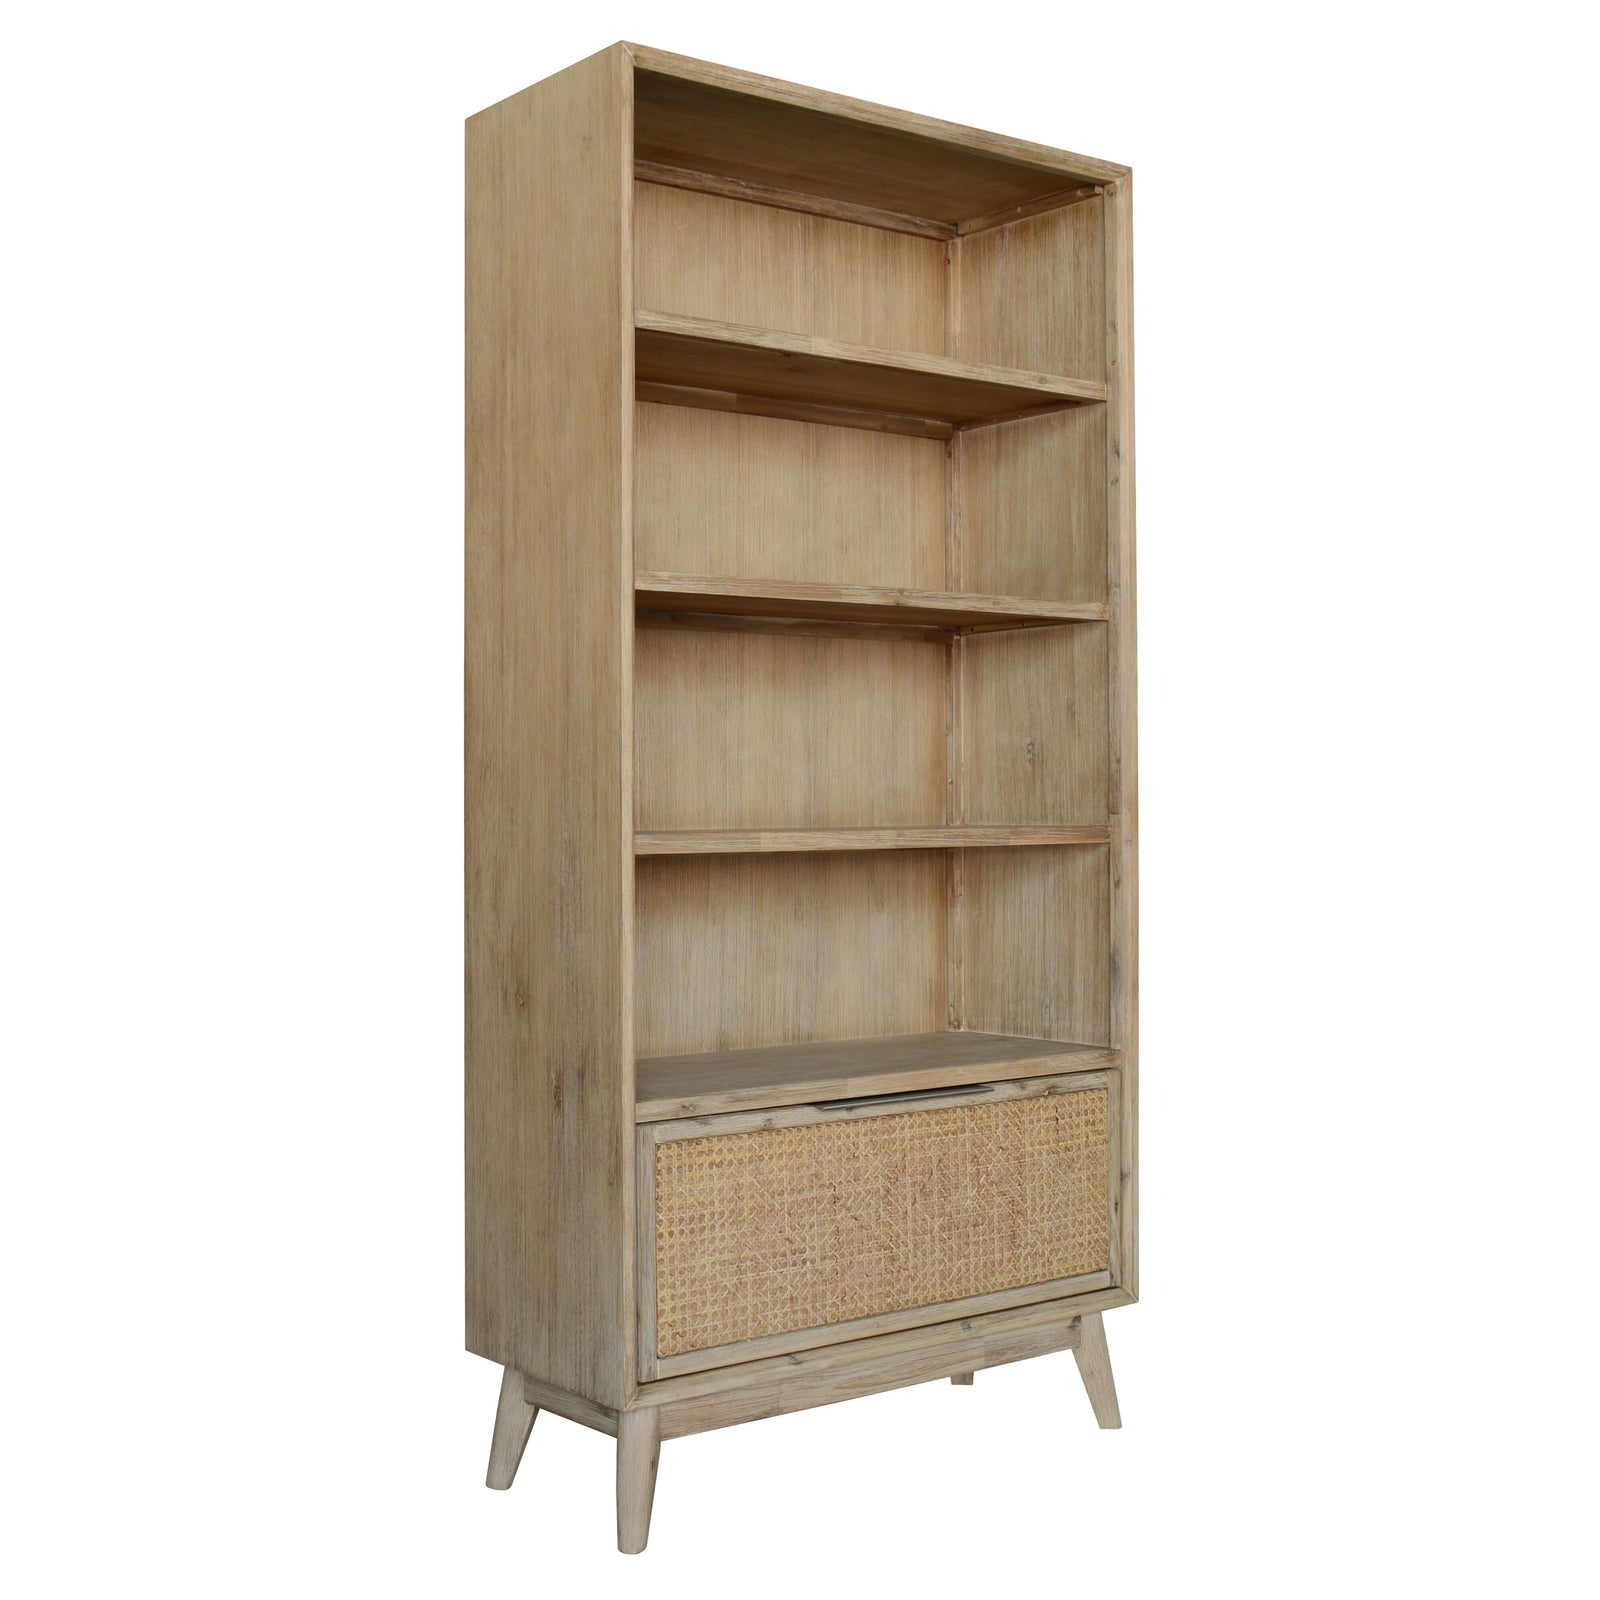 Grevillea Bookshelf Bookcase 4 Tier Drawers Solid Acacia Timber Wood - Brown-Upinteriors